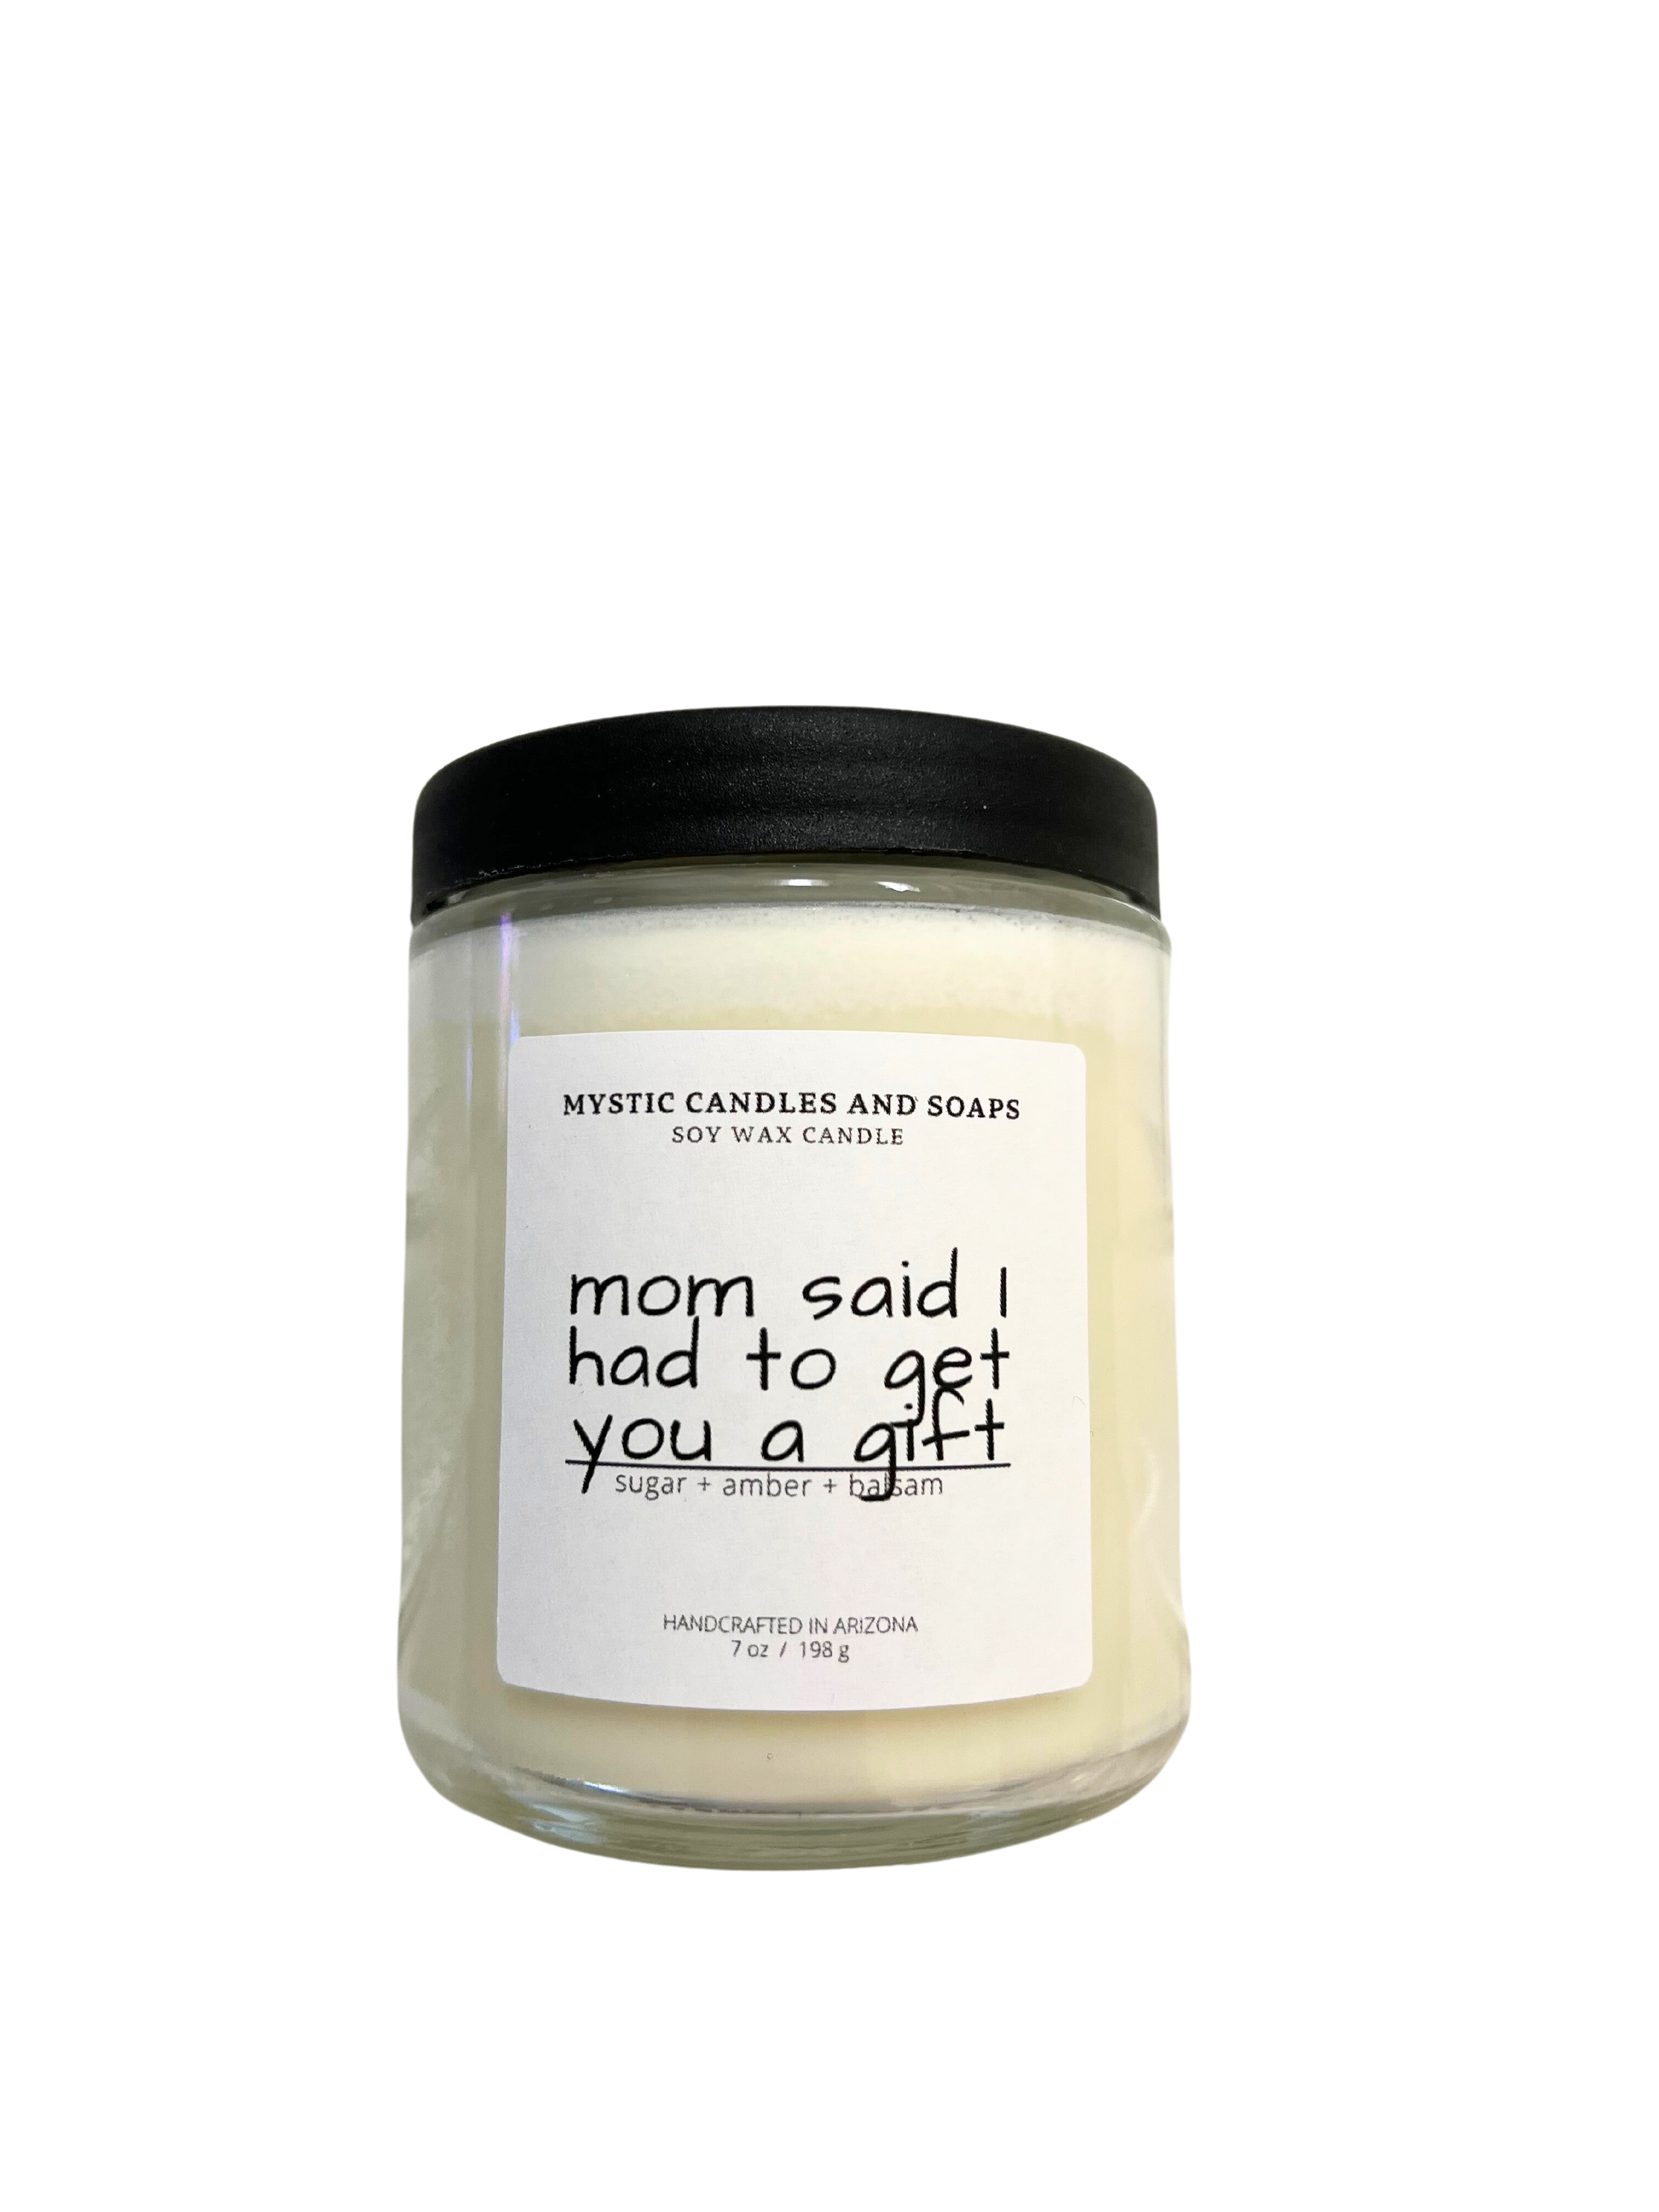 Mom said I had to get you something gift Candle - Mystic Candles